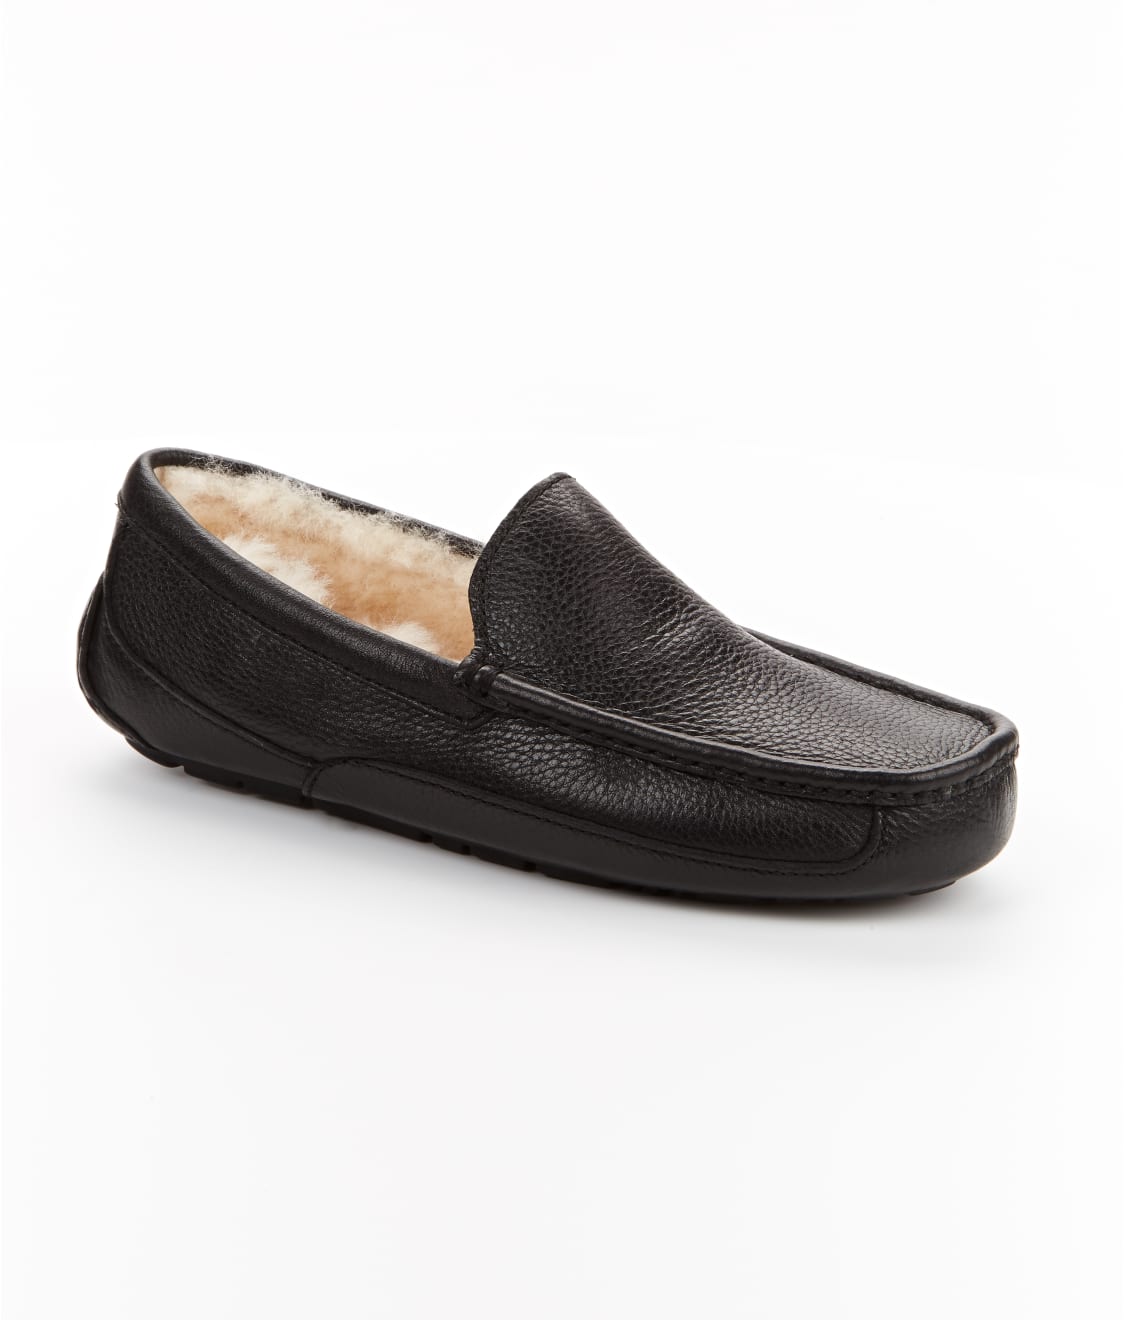 UGG Men's Ascot Leather Slippers & Reviews | Bare Necessities (Style 5379)